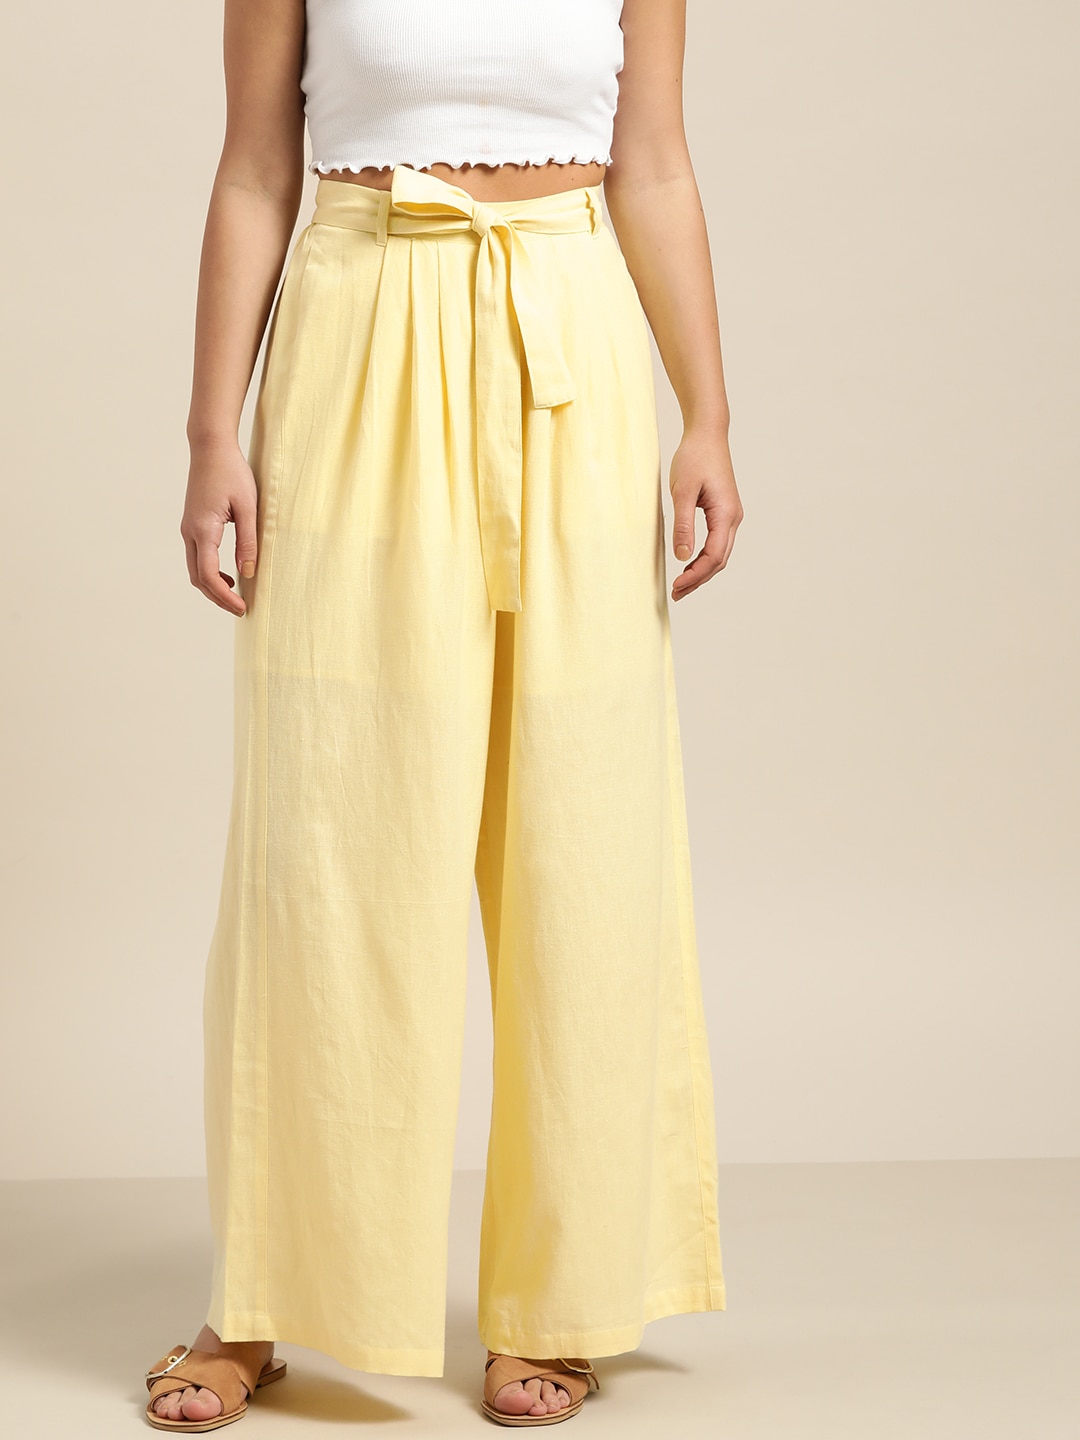 Shae by SASSAFRAS Women Yellow Regular Fit Solid Palazzos Price in India